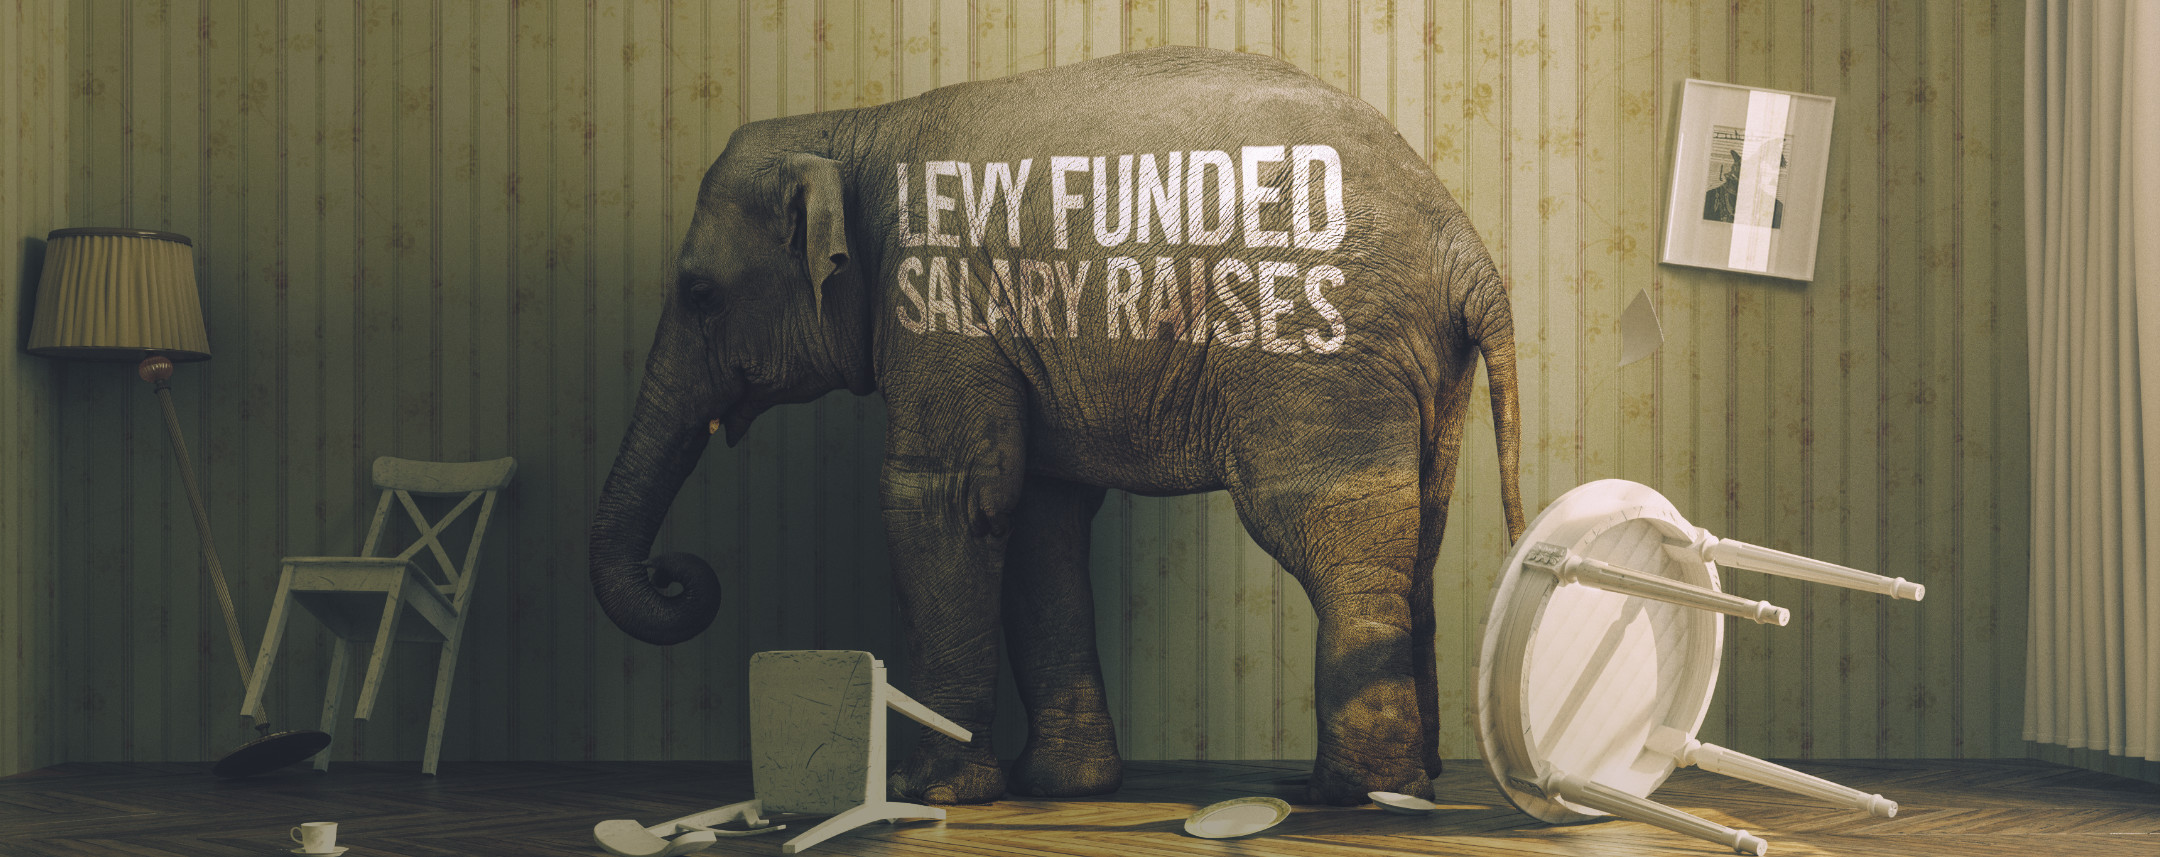 levy-funded-salary-FEATURED.jpg